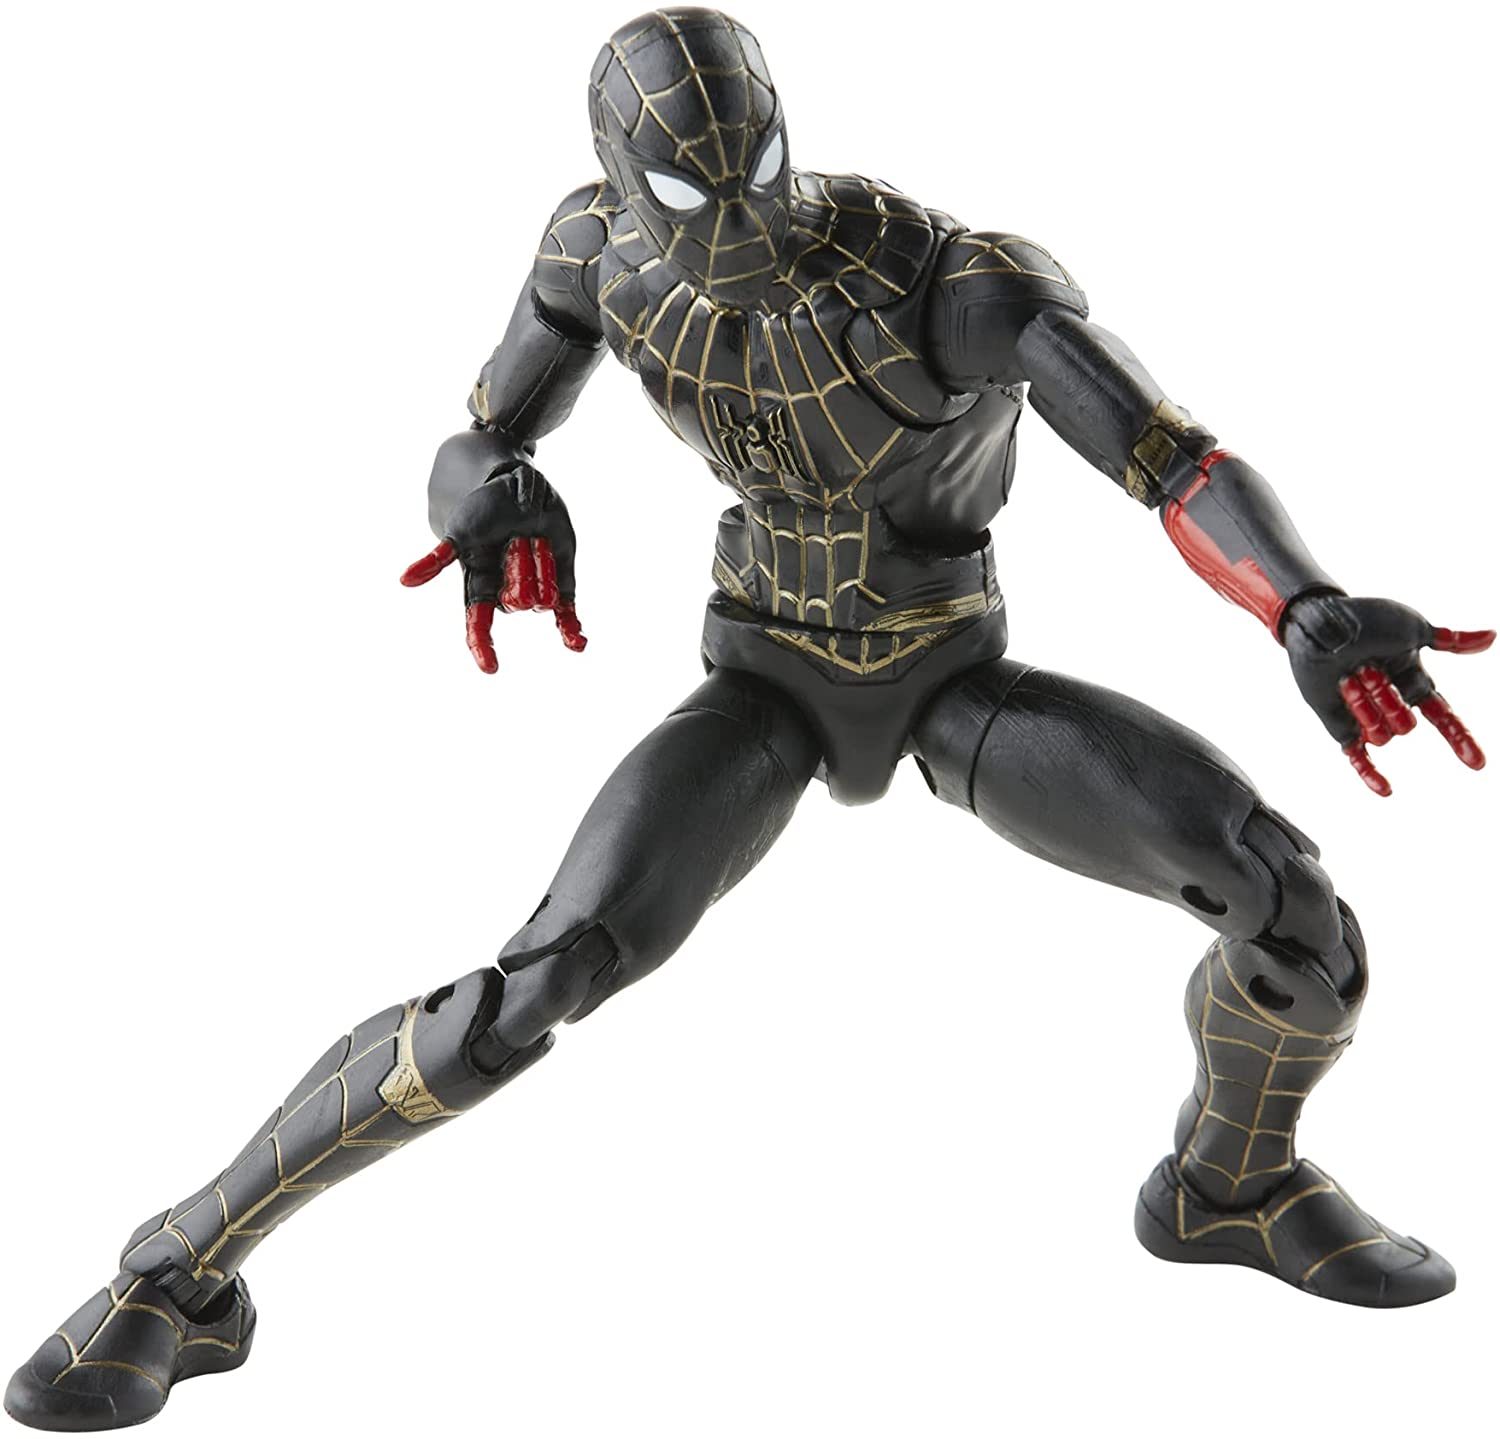 Marvel Legends Series Black & Gold Suit Spider-Man 6-inch Collectible Action Figure Toy, 2 Accessories and 1 Build-A-Figure Part(s) - Action & Toy Figures Heretoserveyou